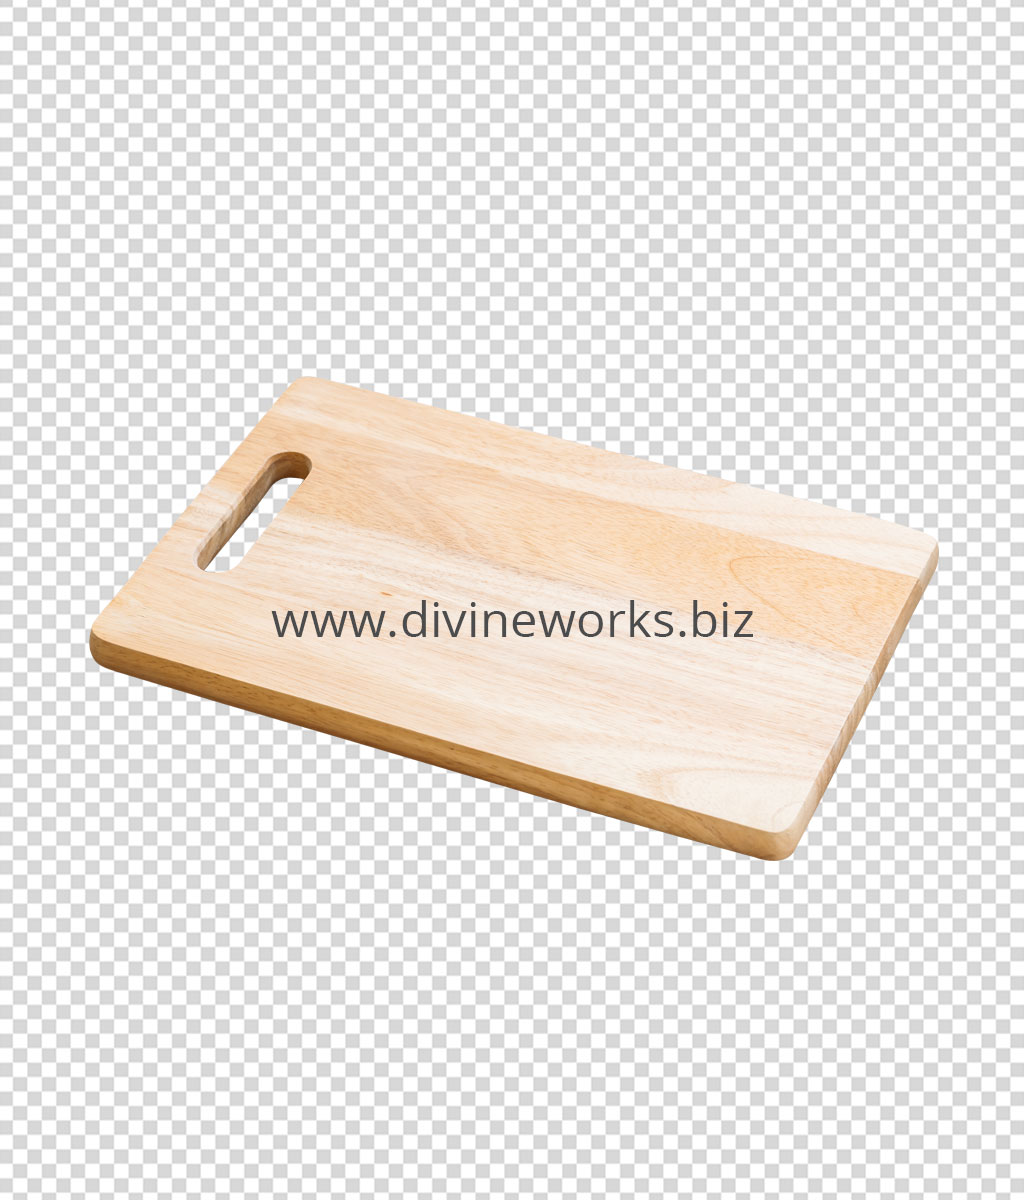 Wooden Cutting Board Free Png Image